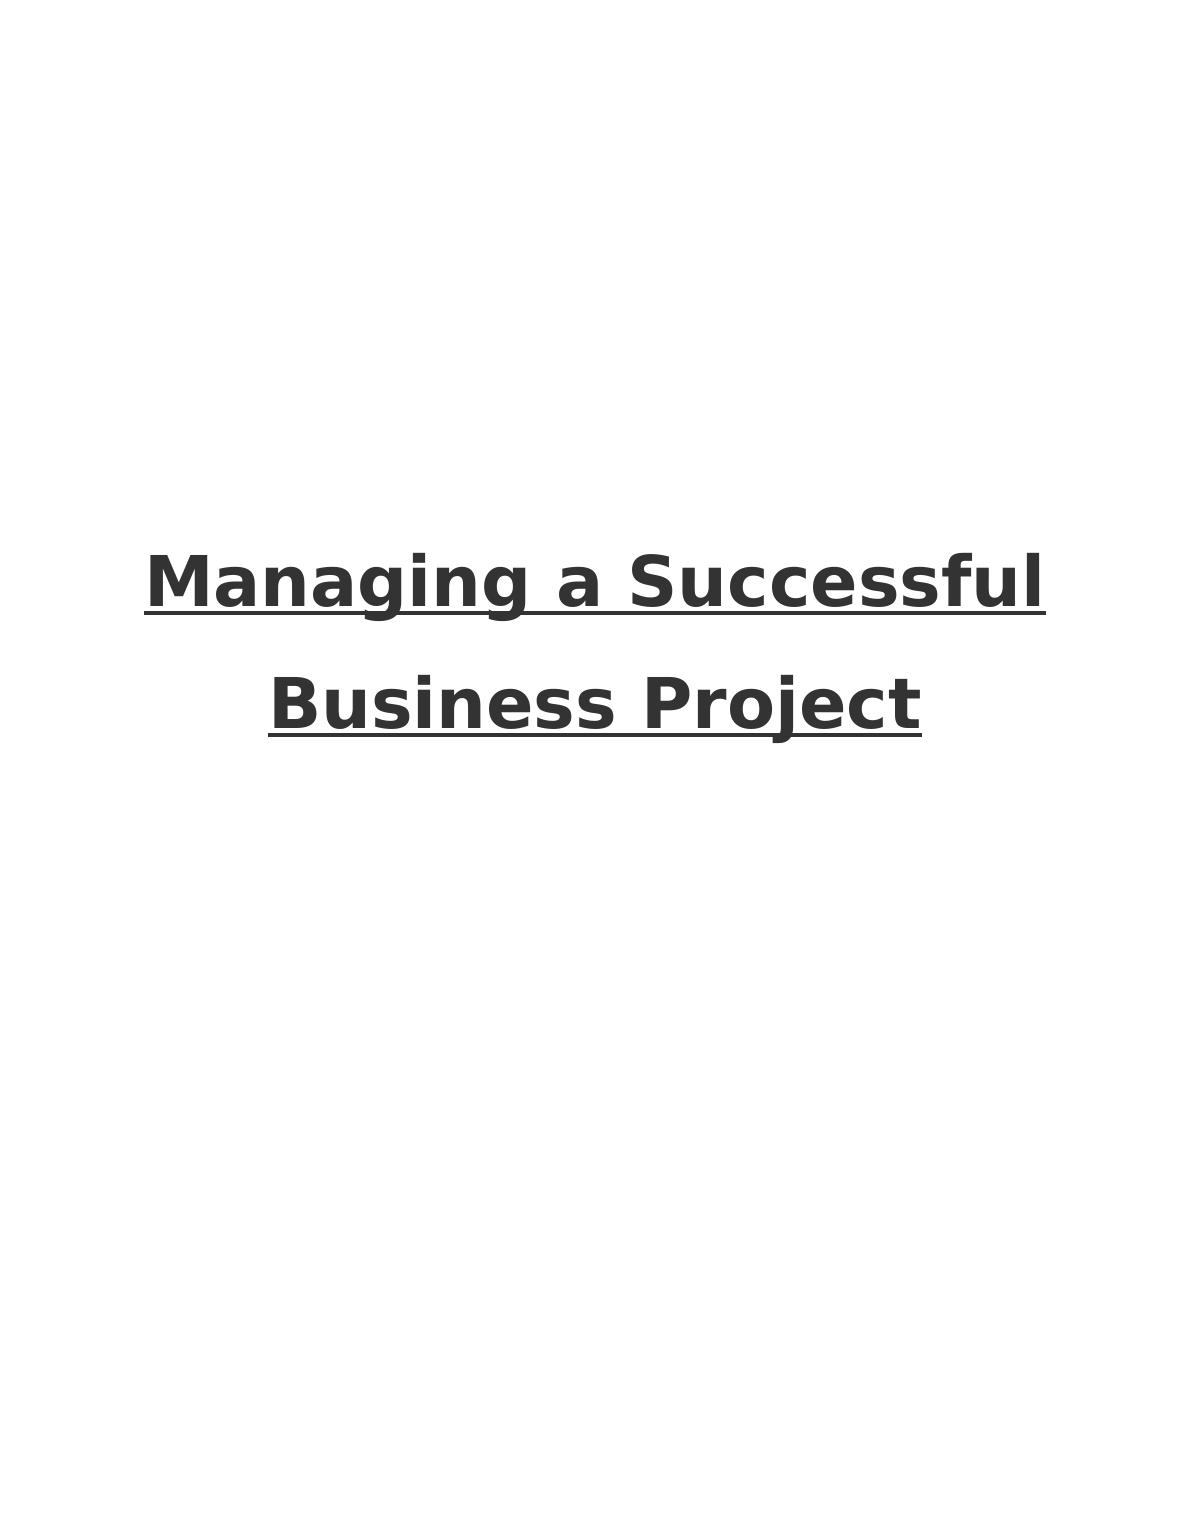 Managing a Successful Business Project - Mark & Spencer_1